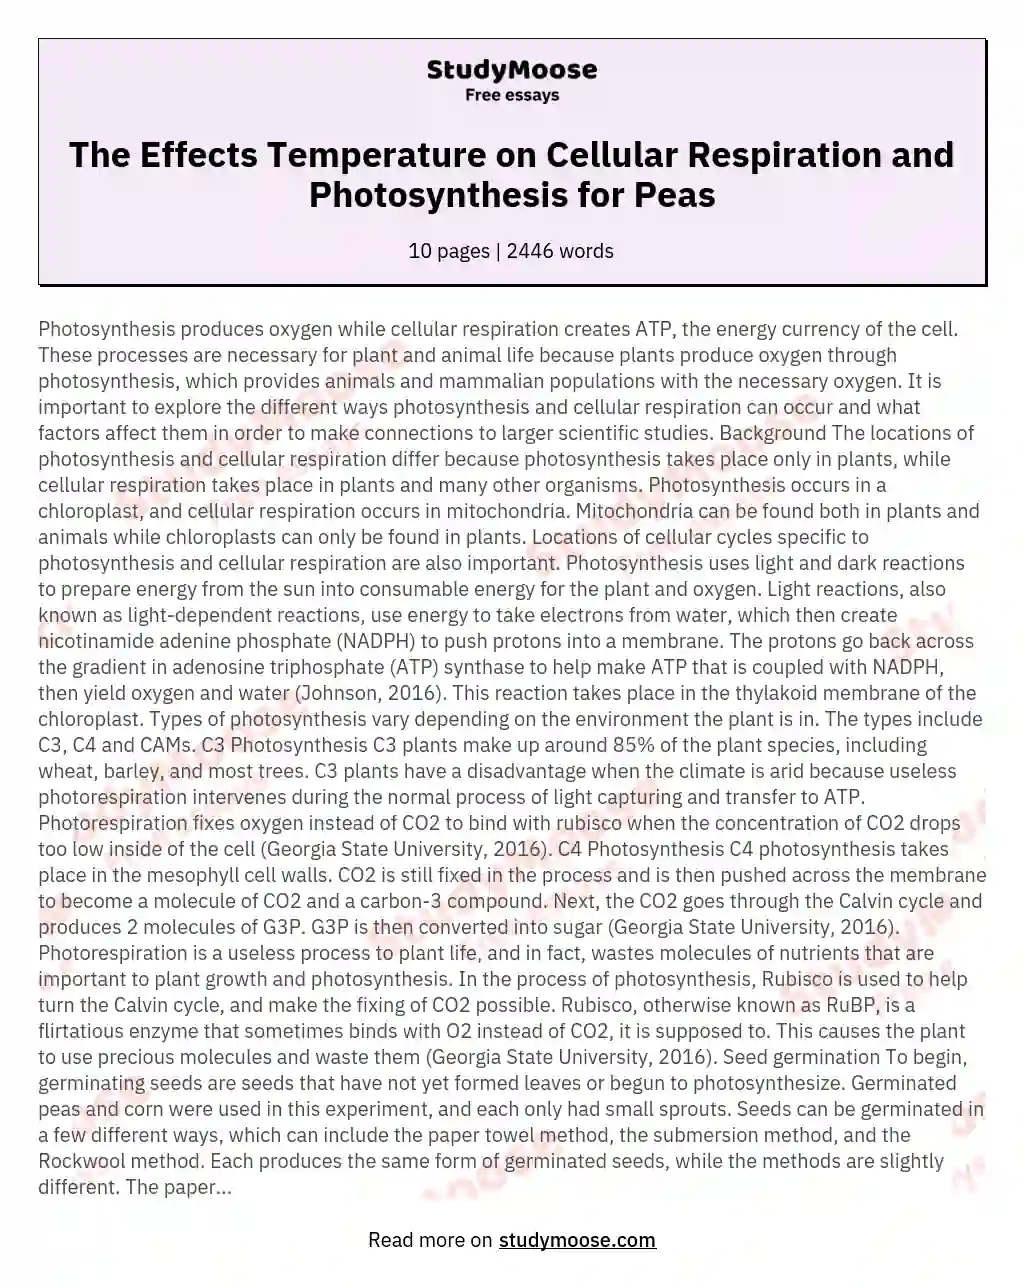 The Effects Temperature on Cellular Respiration and Photosynthesis for Peas essay